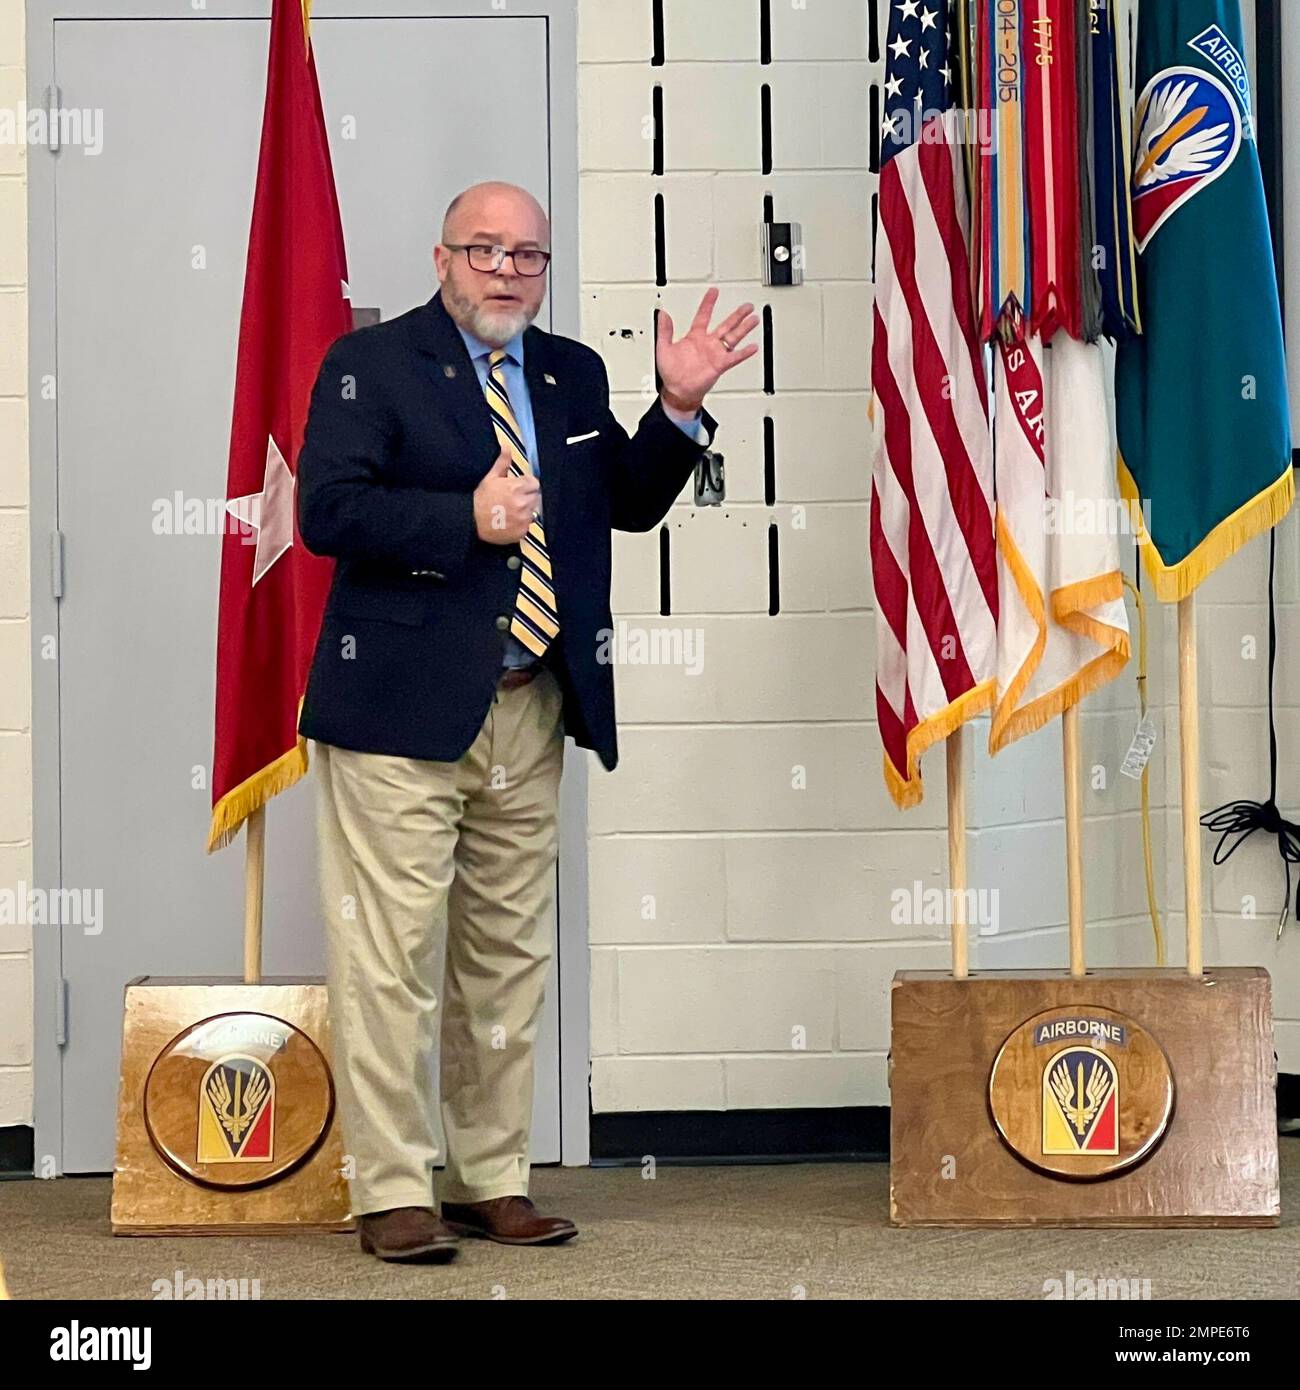 Timothy Tilley, director of protocol for JRTC and Fort Polk discusses the flag line during the Protocol Fundamentals class October 12 and 13 at the Joint Readiness Training Center and Fort Polk, Louisiana. Stock Photo